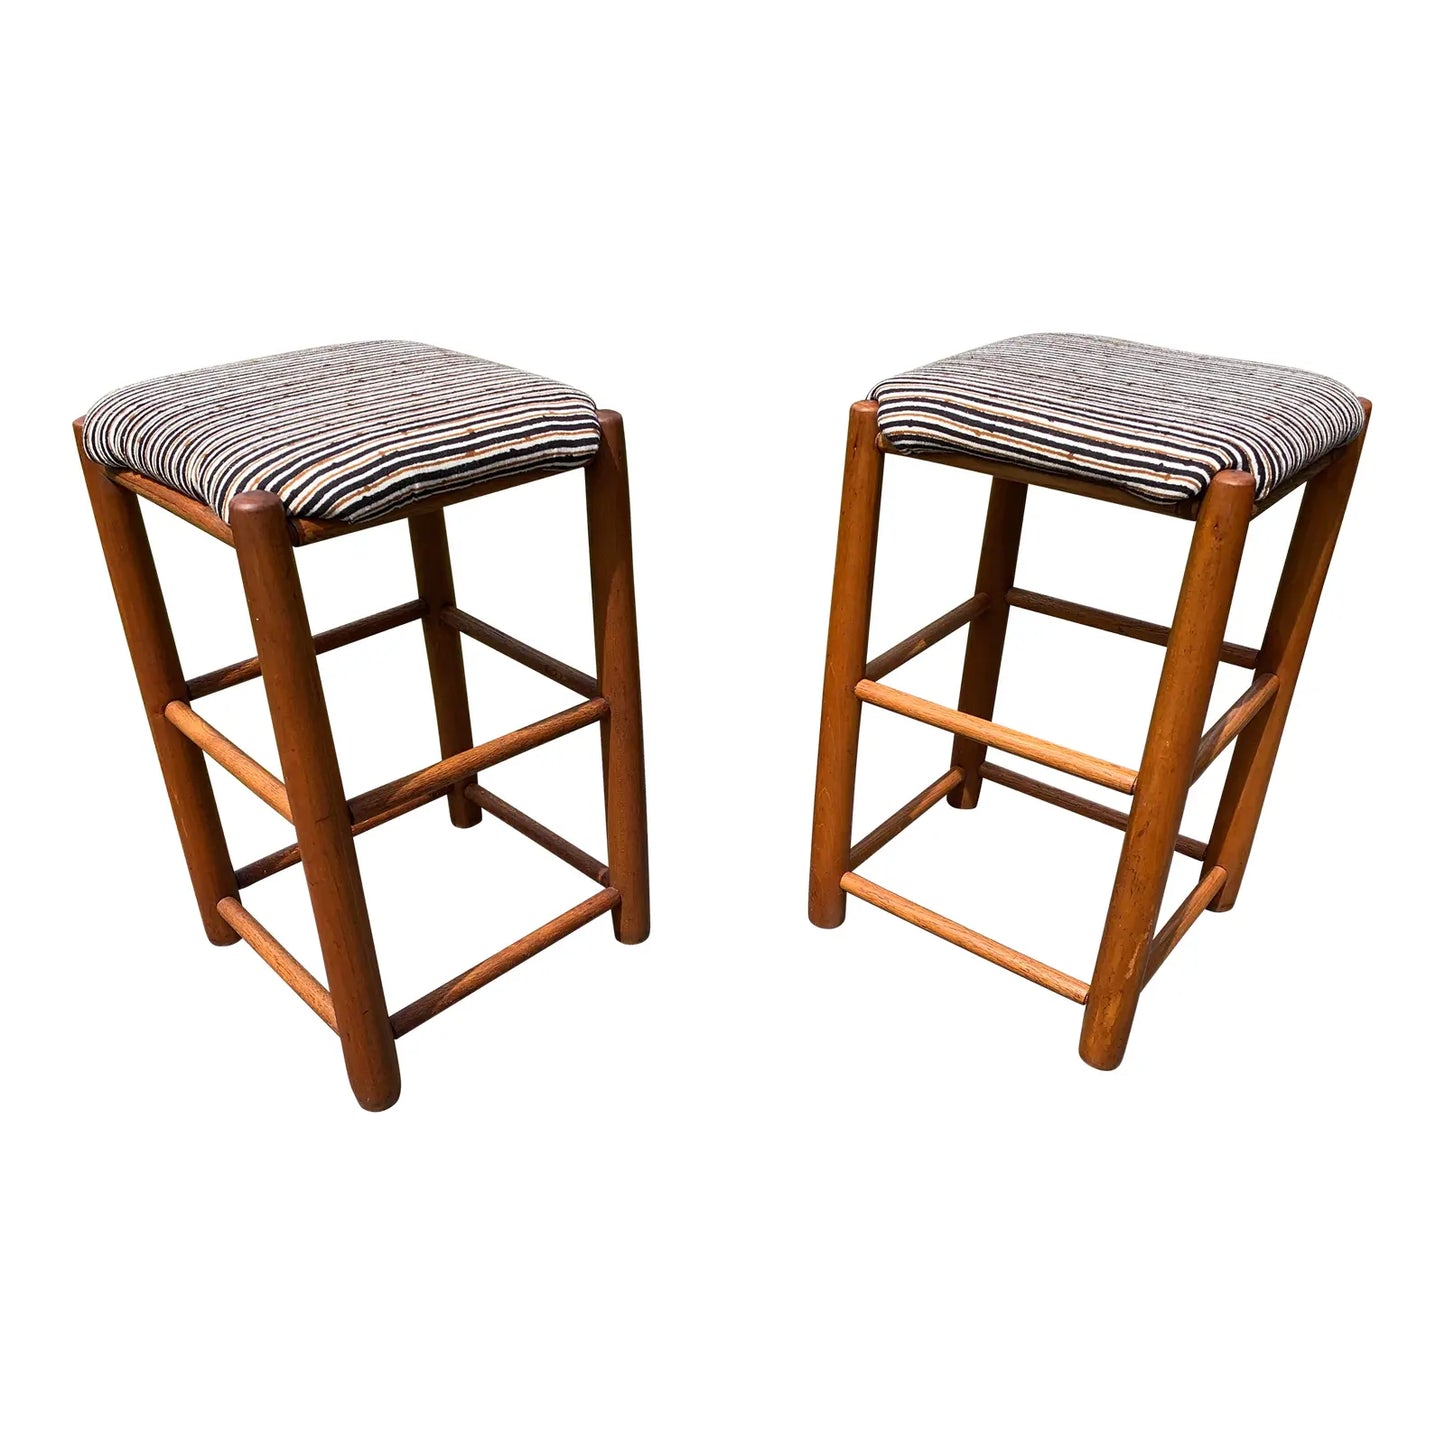 Late 20th Century Solid Wood Bar Stools Brunschwig & Fils Upholstery - Set of 2